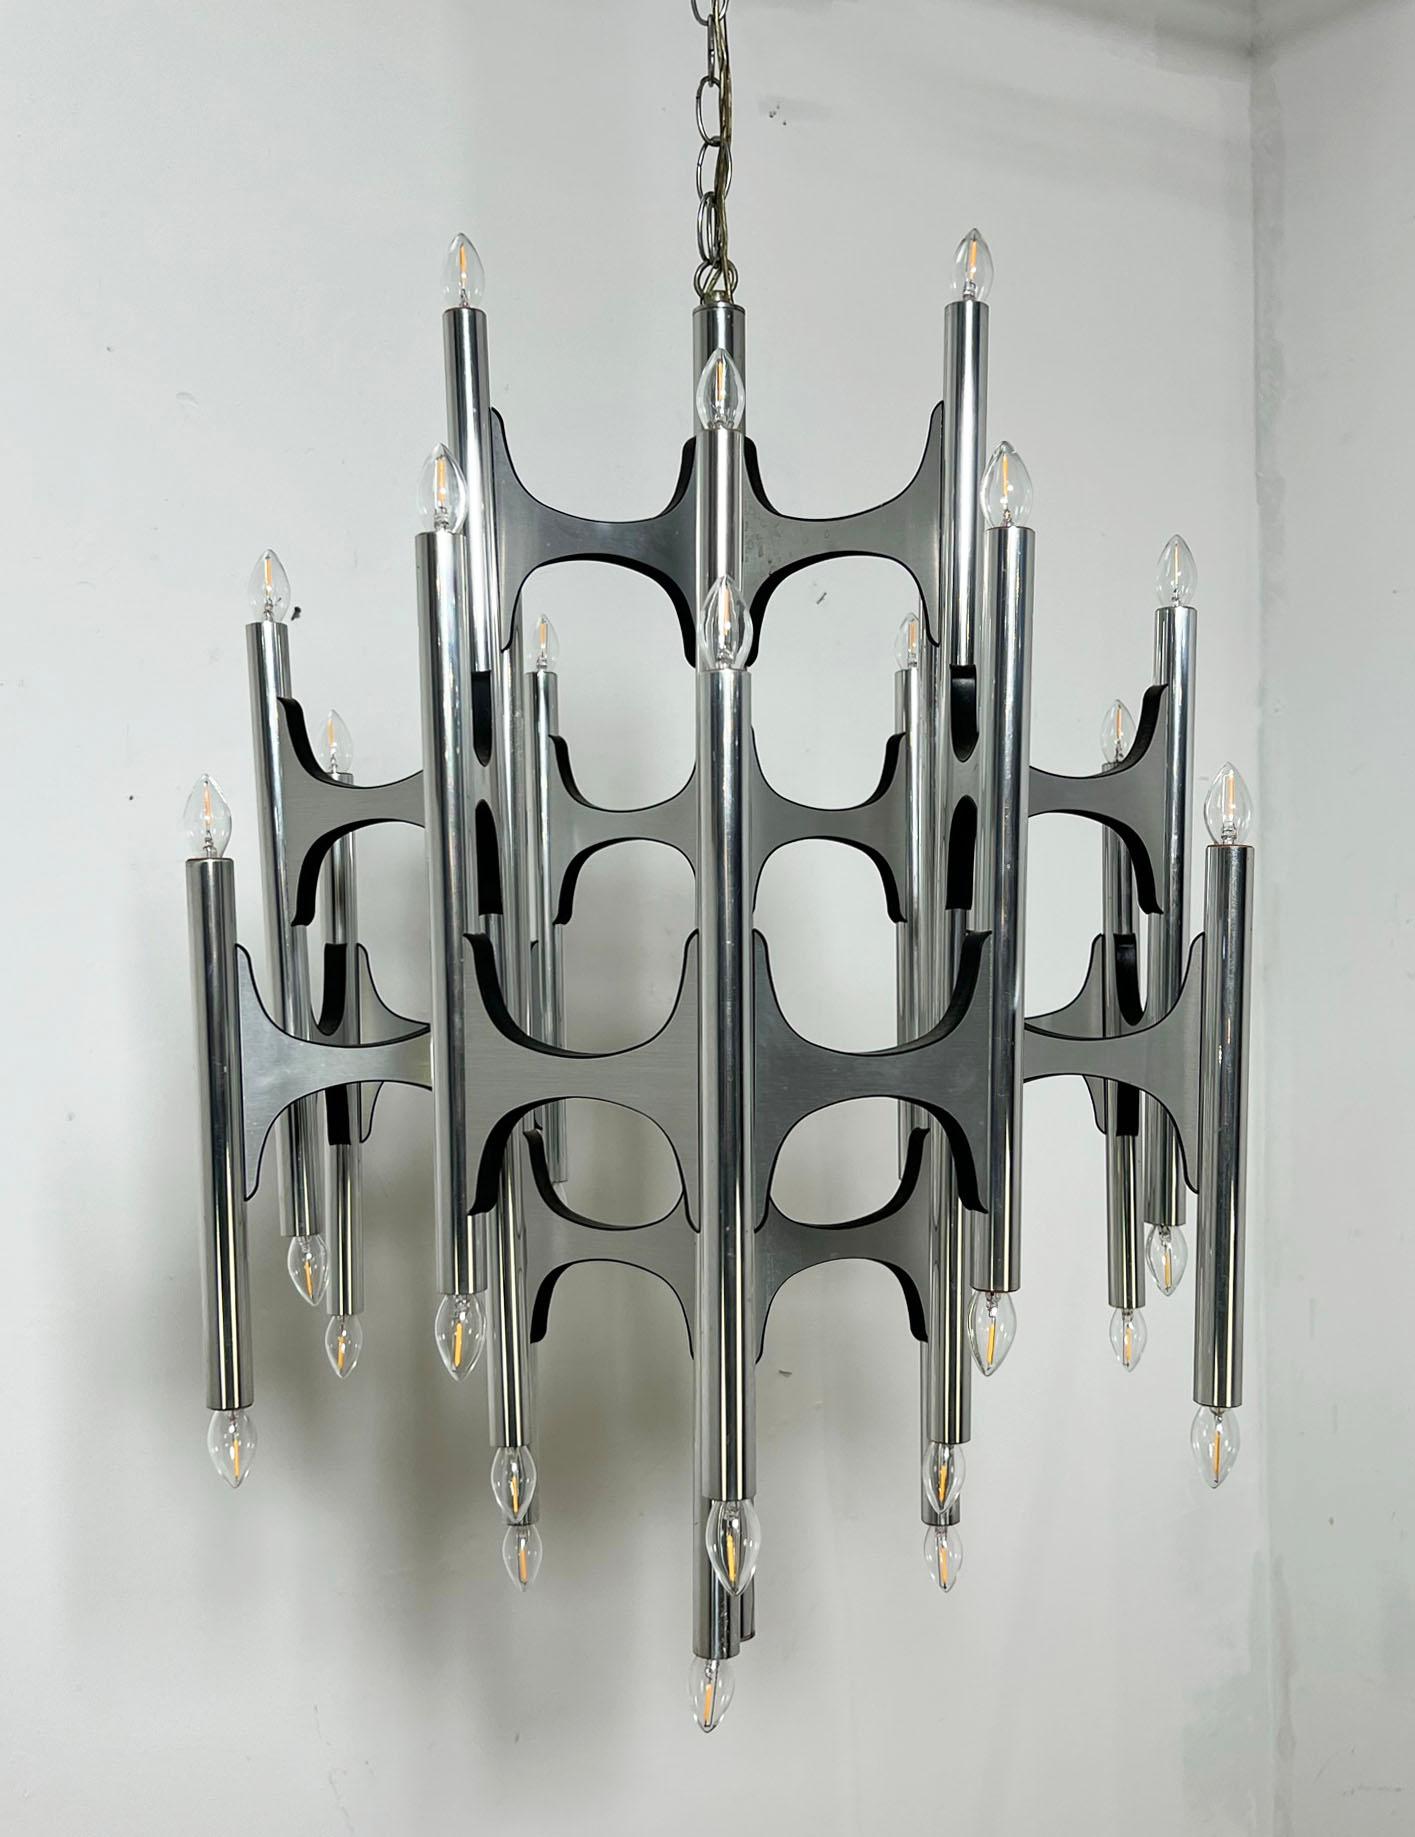 Large modernist thirty-six bulb chandelier by Gaetano Sciolari for Lightolier, ca. early 1970s. A classic architectural design that offers both upward and downward facing light, creating an enormous focal presence. Includes original ceiling plate